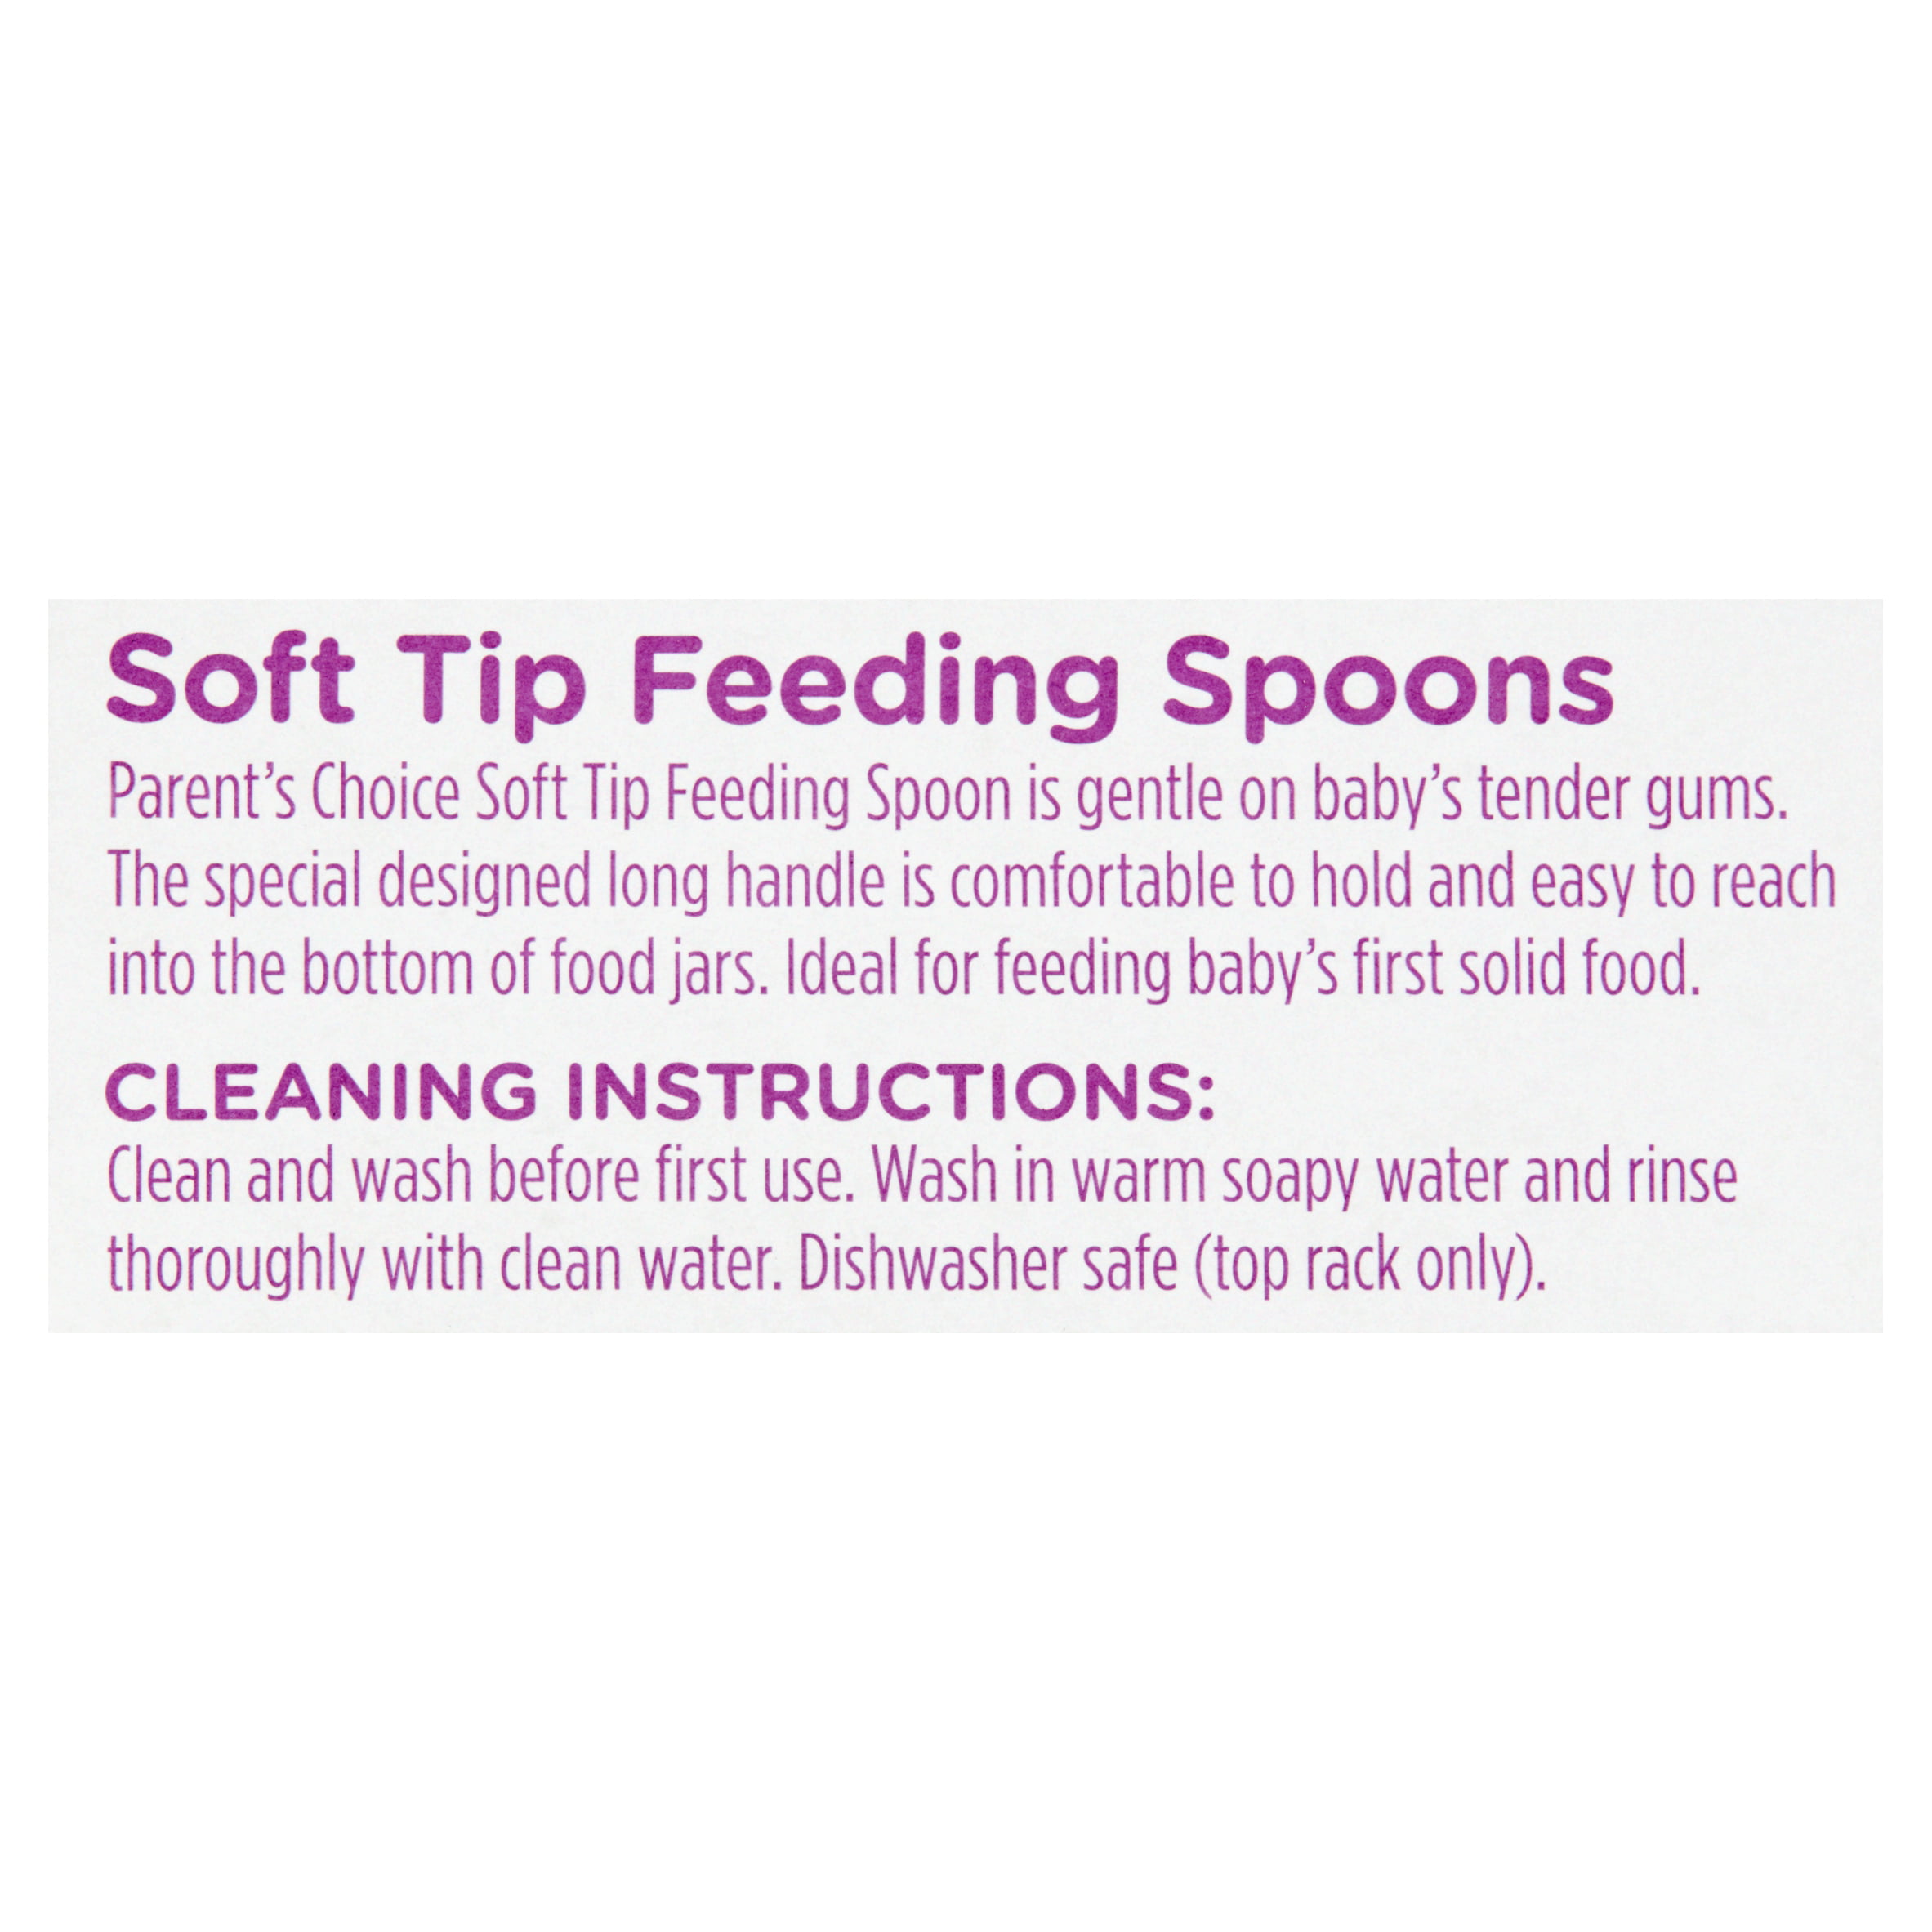 Parent's Choice Baby Feeding Fork & Spoon Set, Multicolor, 9+ Months, 10 Count, Size: 10 ct